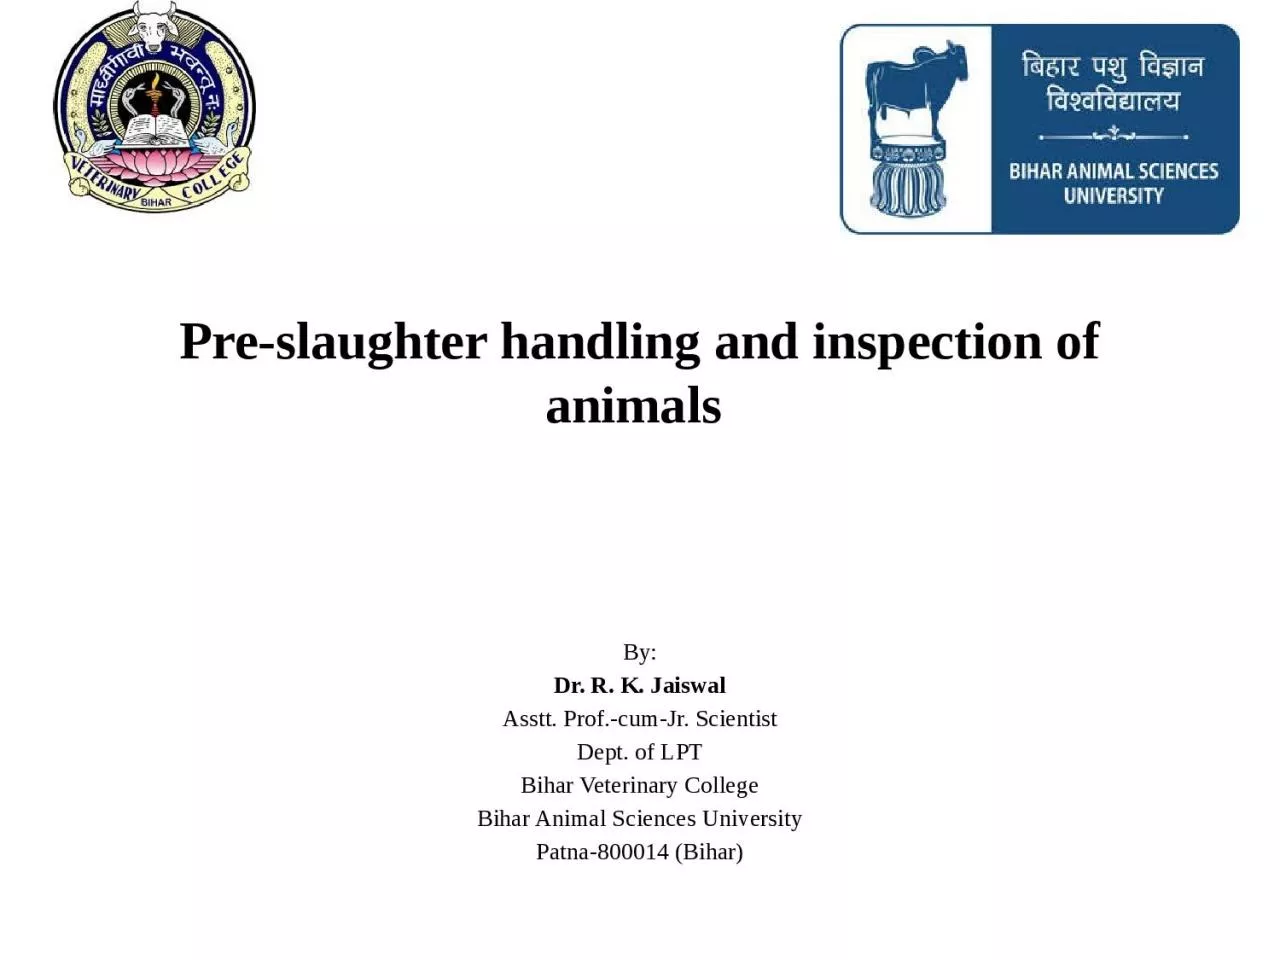 Pre-slaughter handling and inspection of animals